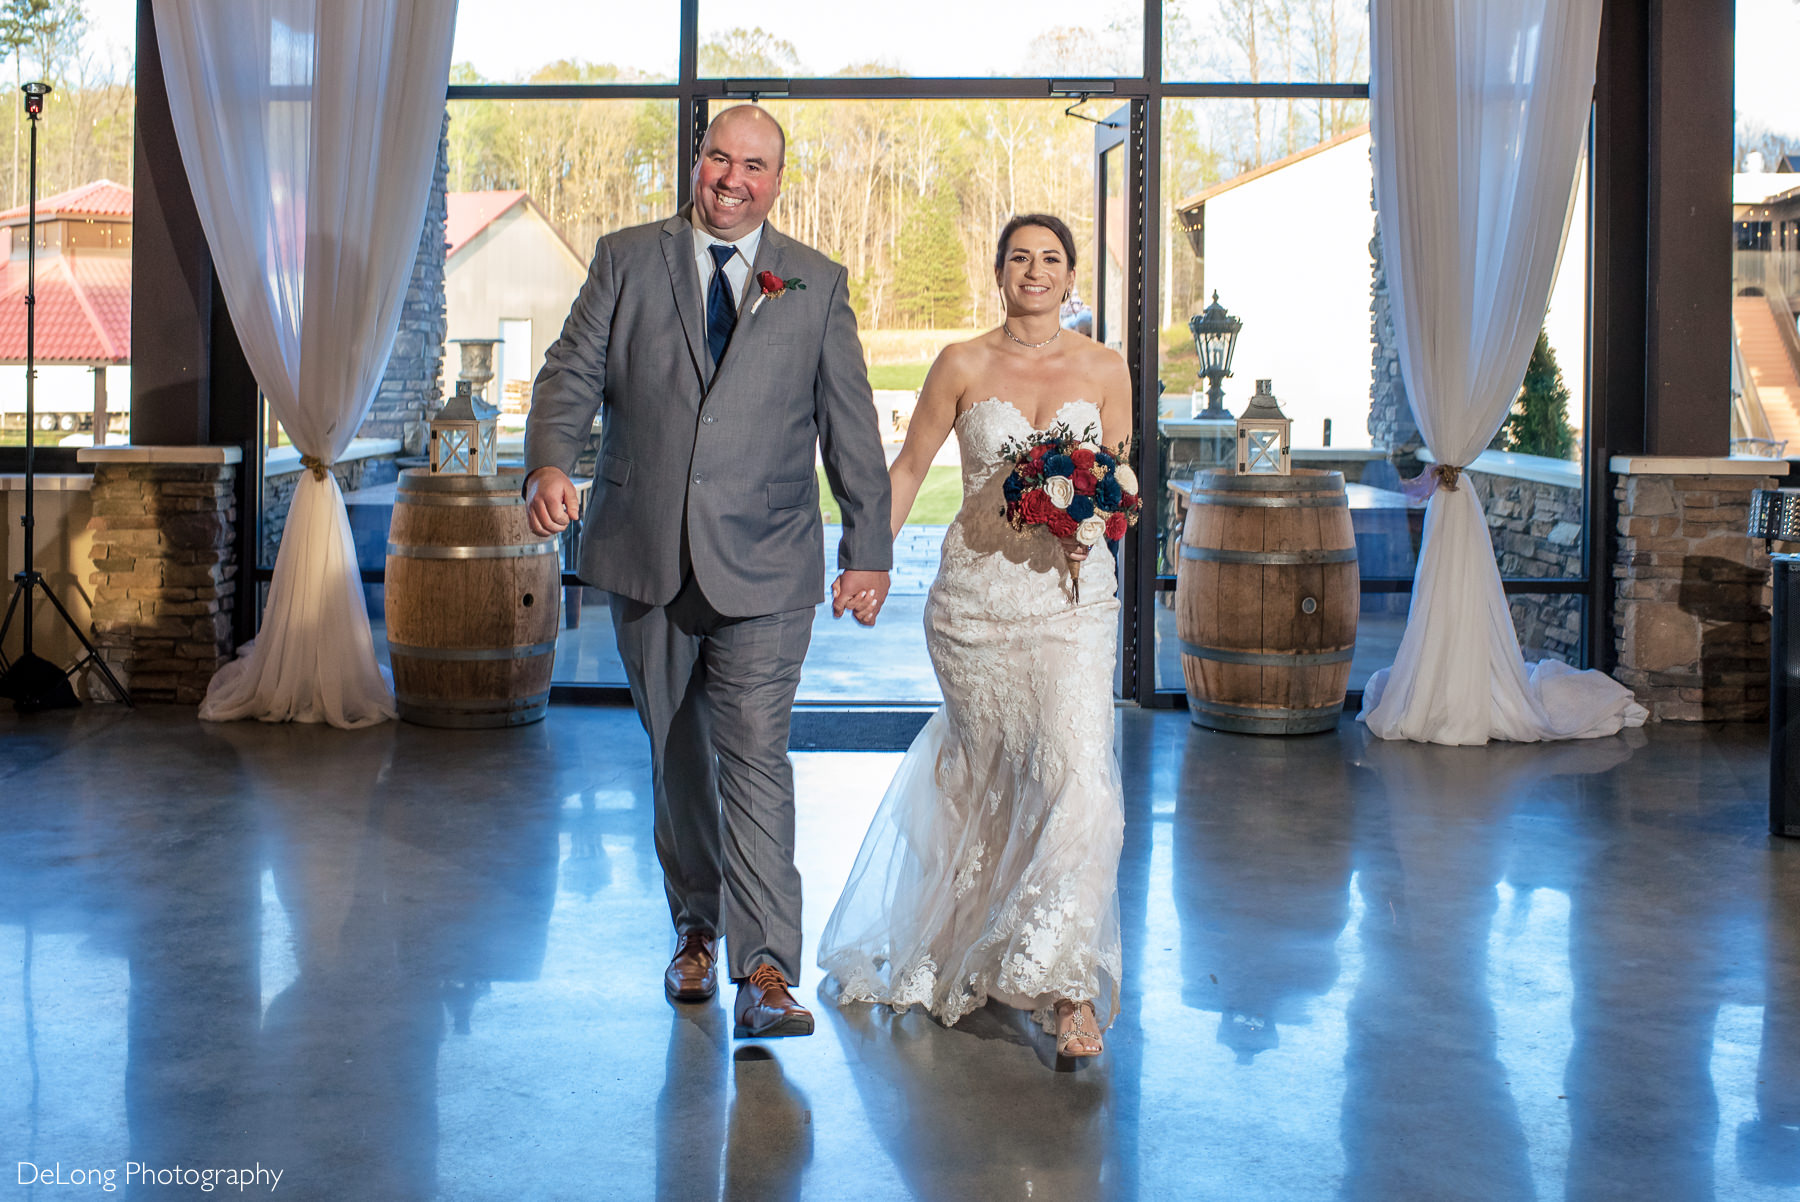 Bride and groom reception entrance at Childress Vineyards by Charlotte Wedding Photographers DeLong Photography